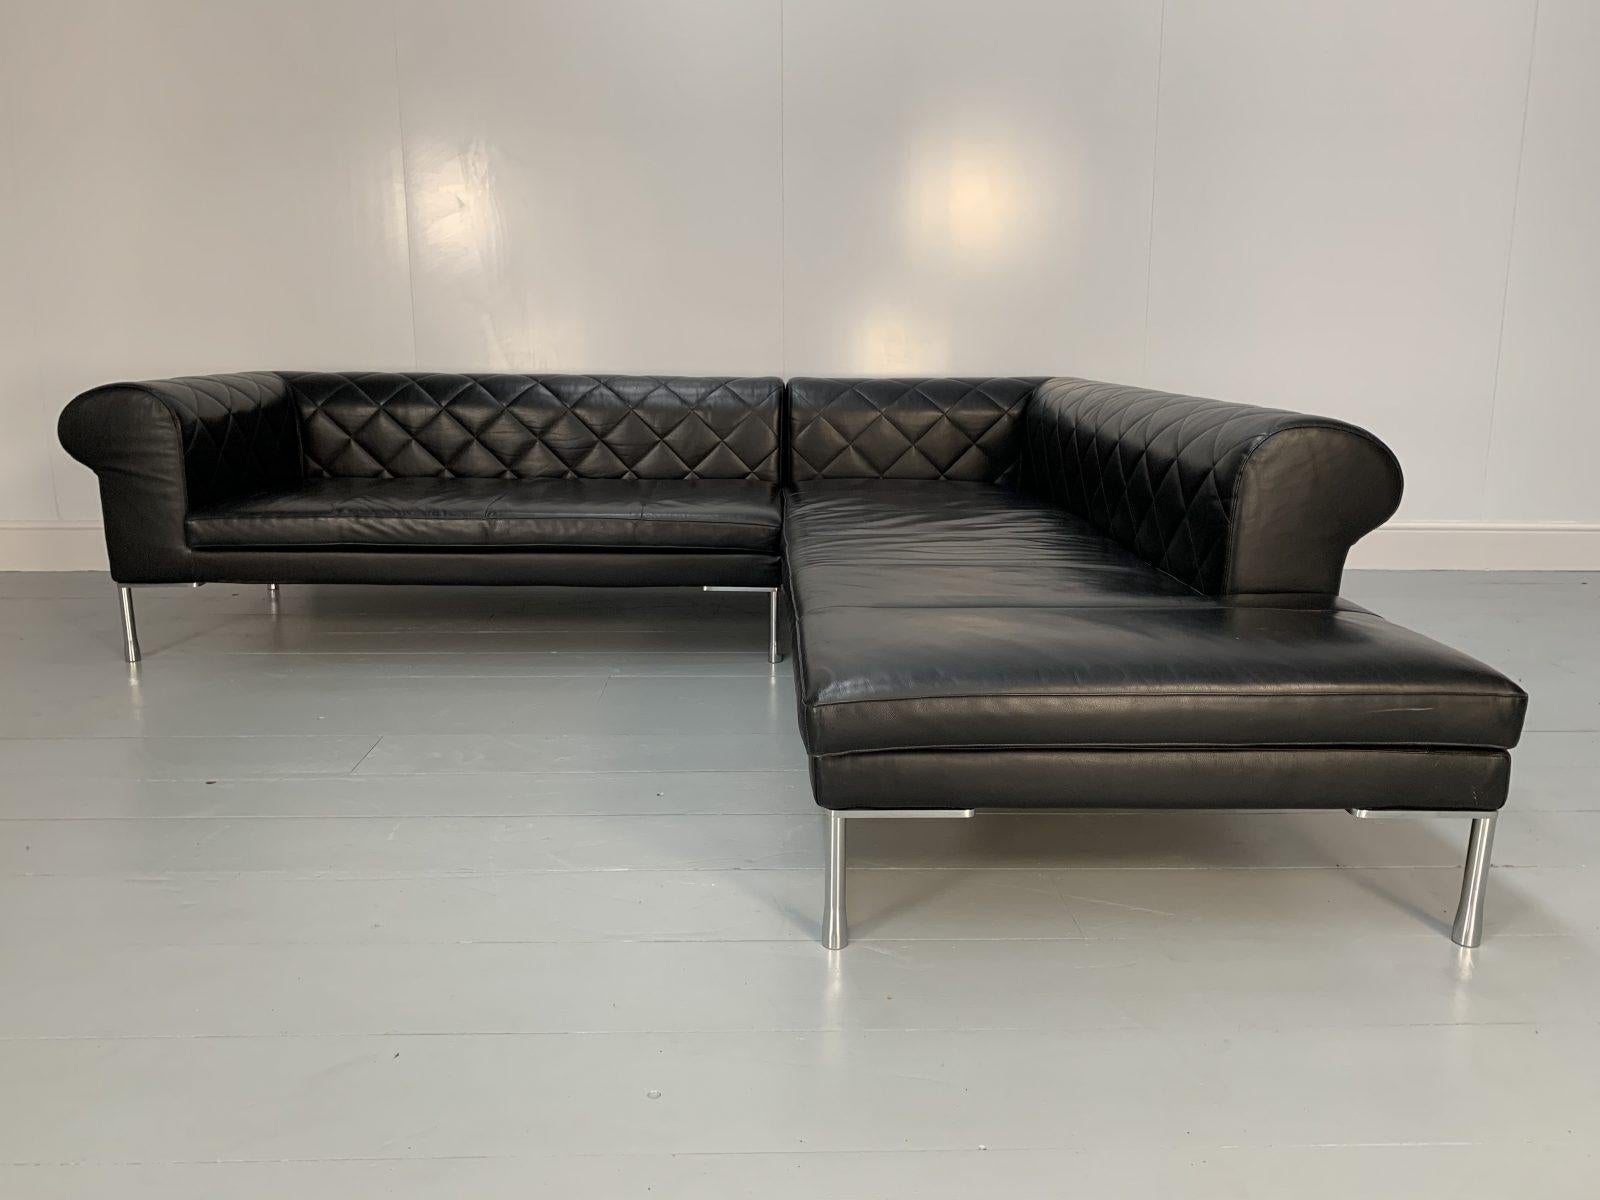 Hello Friends, and welcome to another unmissable offering from Lord Browns Furniture, the UK’s premier resource for fine Sofas and Chairs.

On offer on this occasion is a rare, original “1320 Barocco” L-Shape 5-Seat Sofa from the world renown